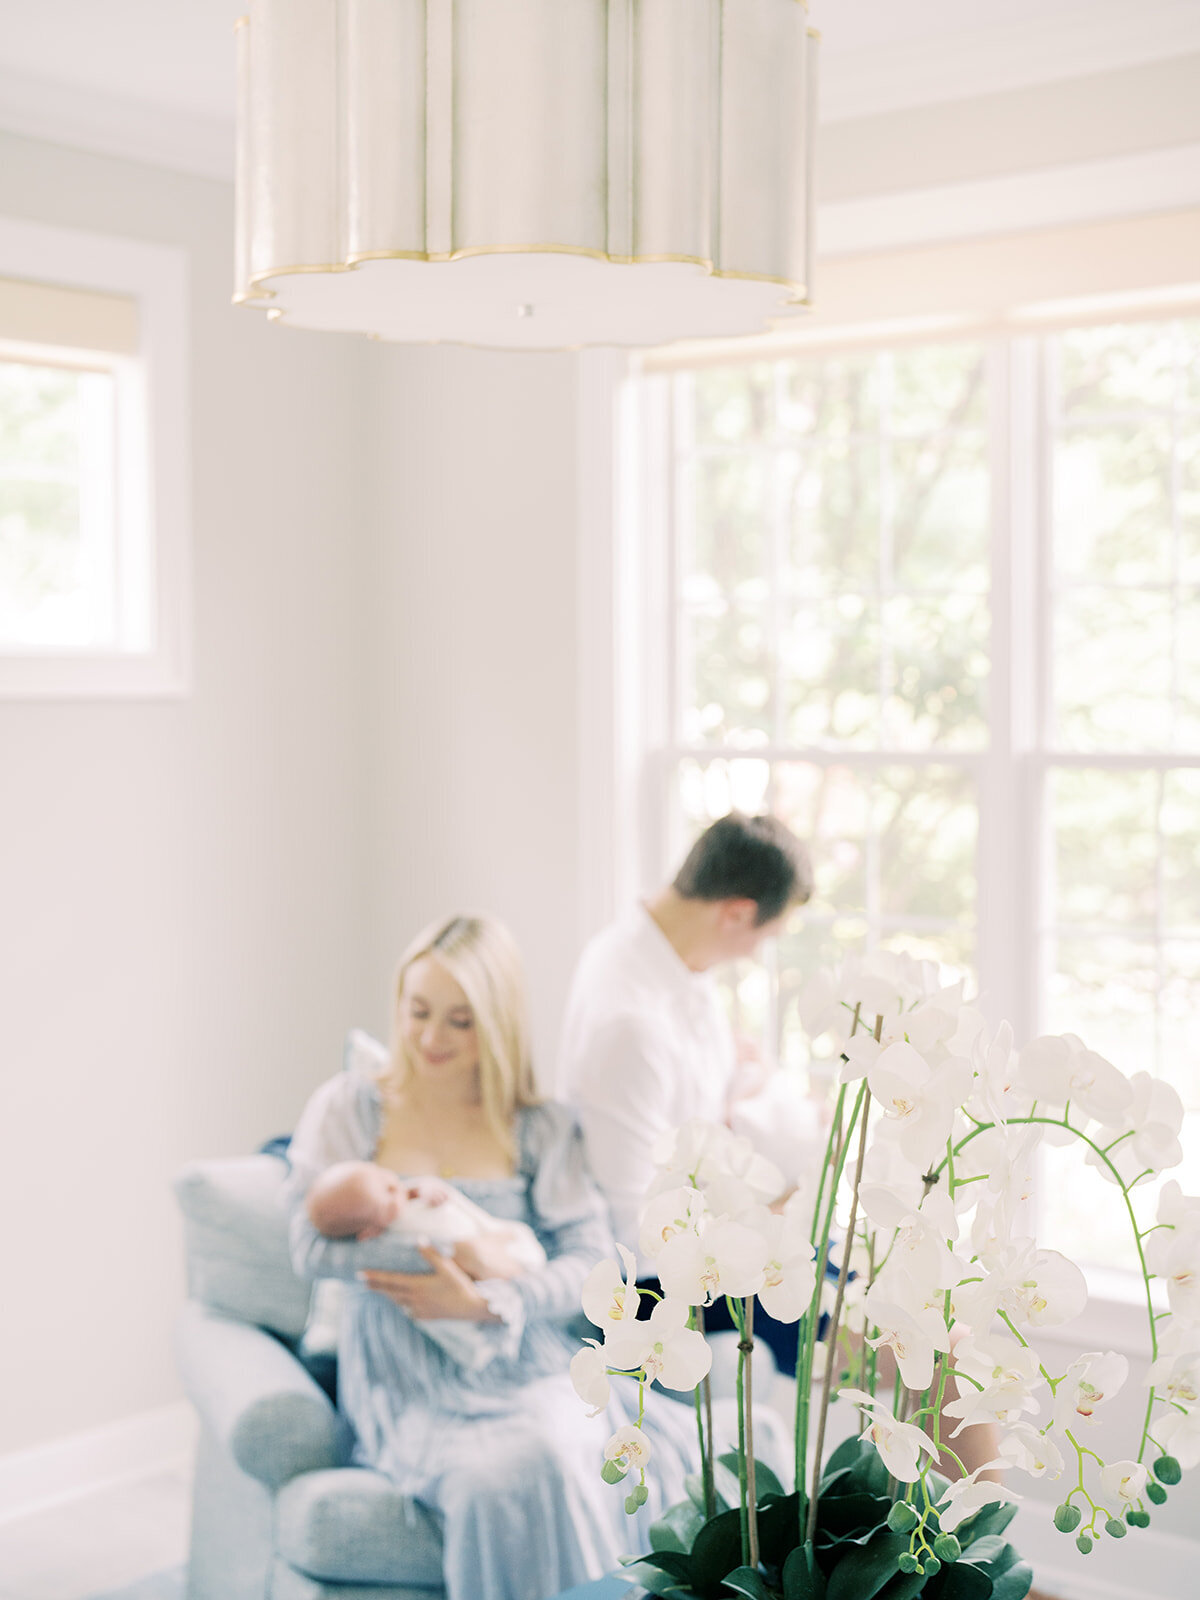 Mother and father sit together in their living room holding their twin baby boys with a white orchid in the foreground.